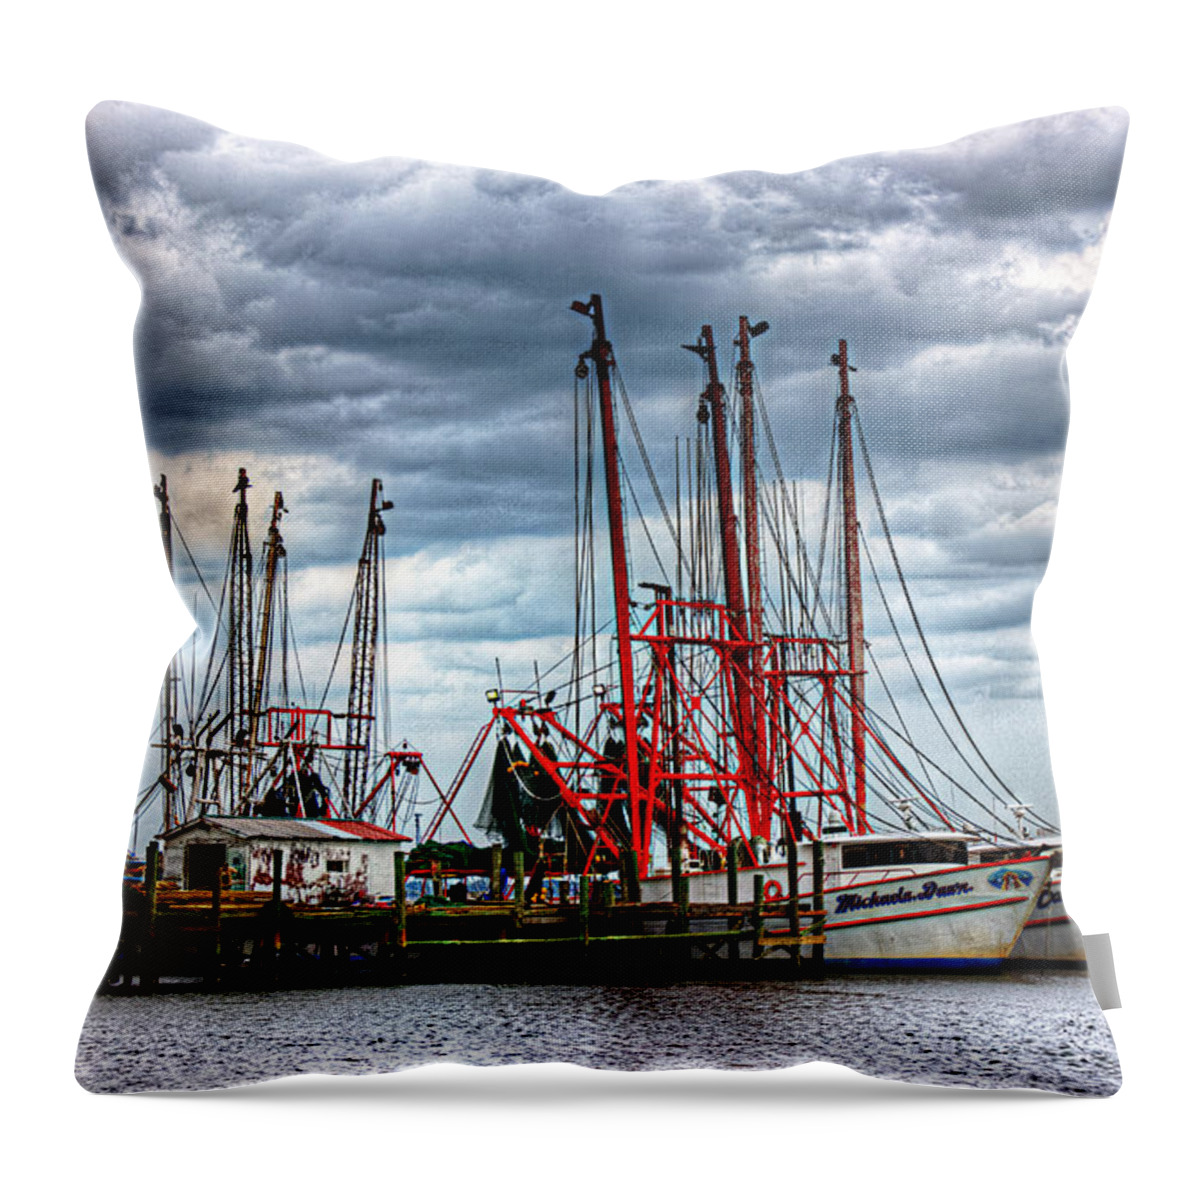 Jacksonville Throw Pillow featuring the photograph Shrimp Boat Dock by Barry Jones